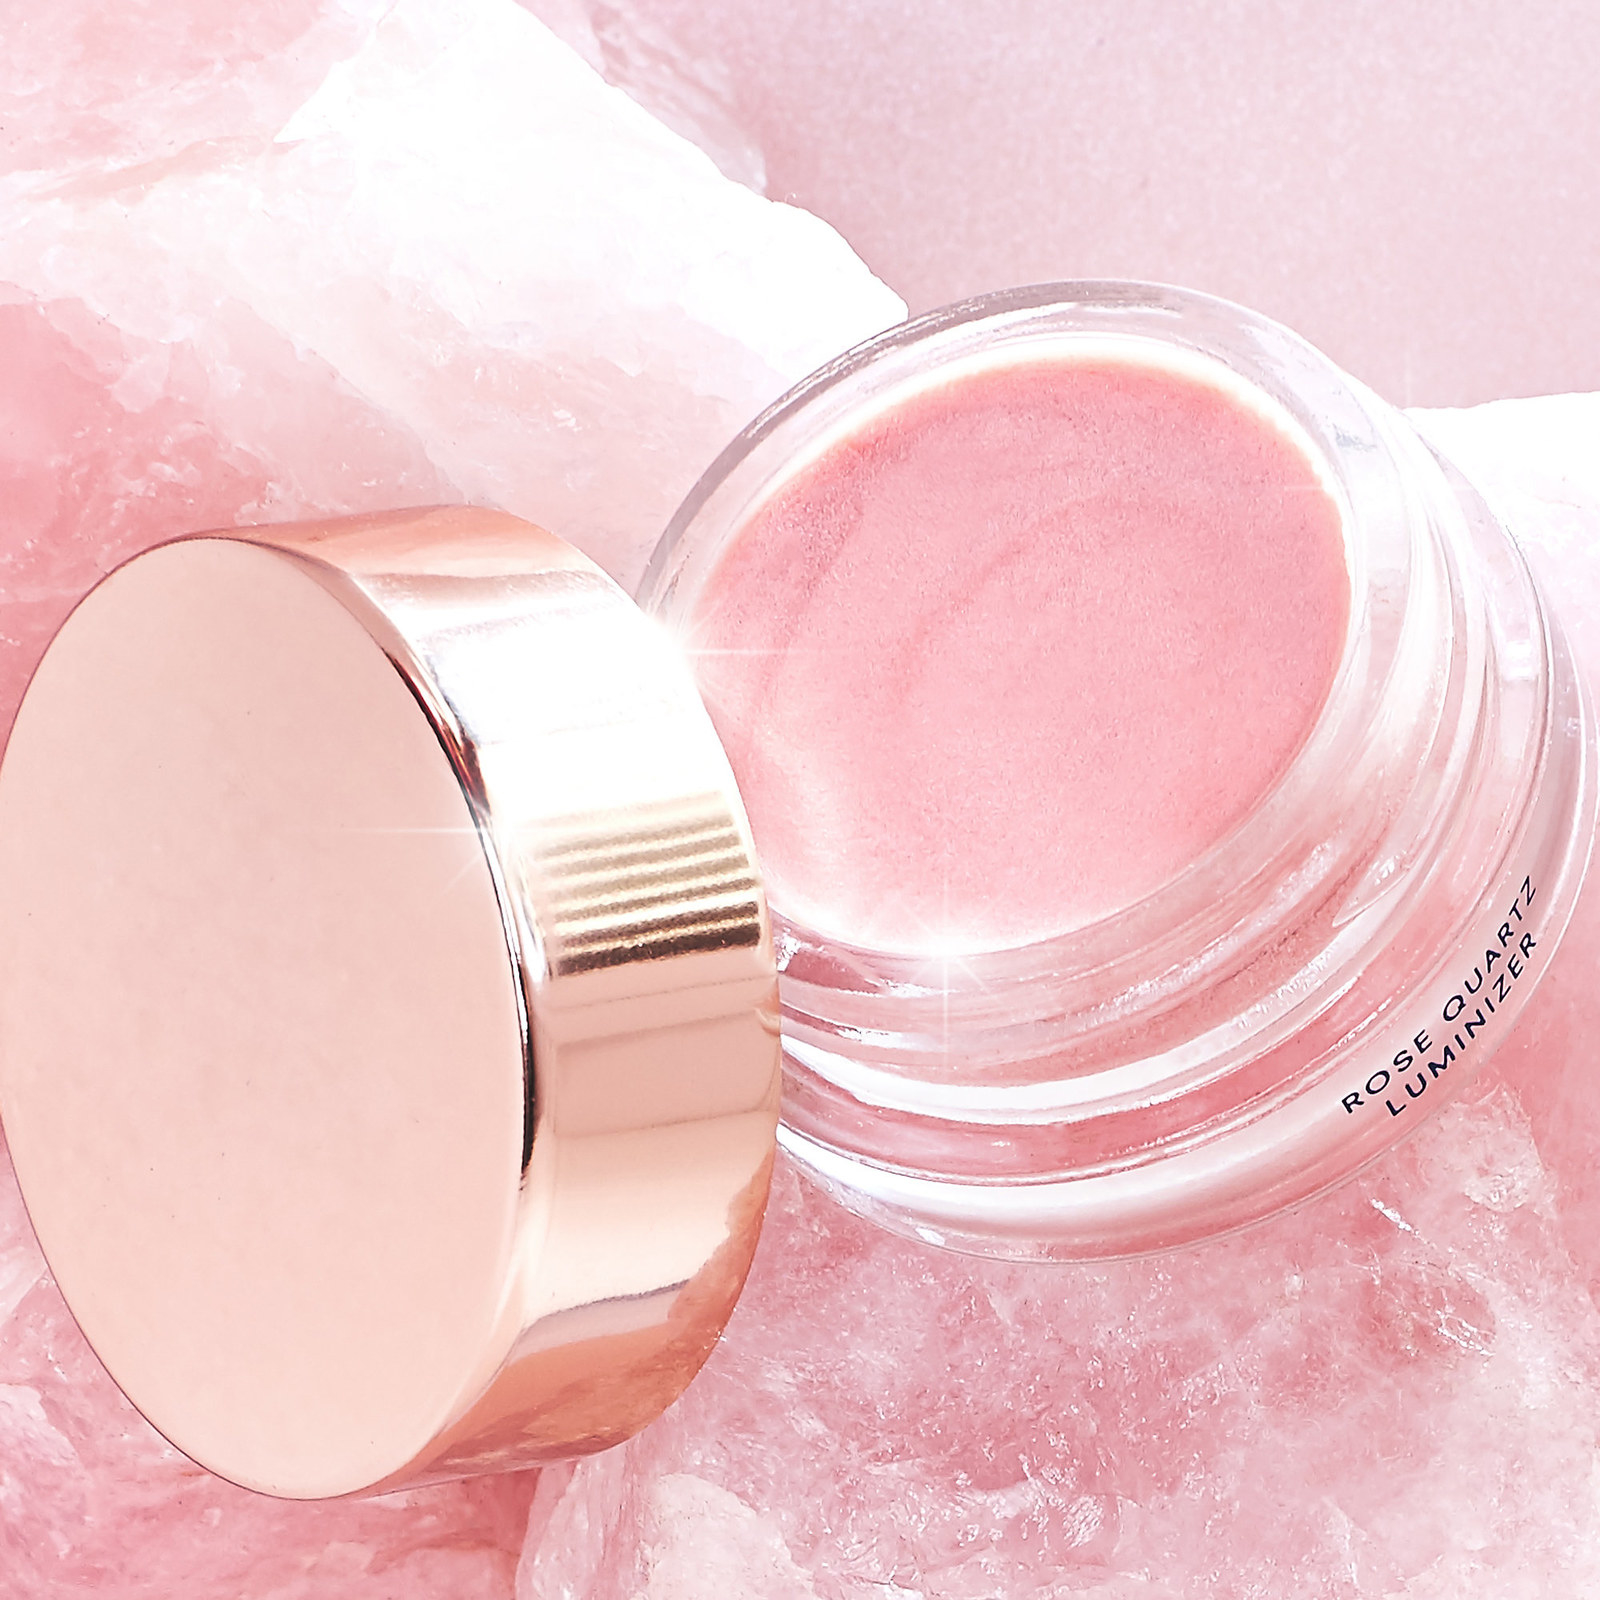 a glass makeup pot with pink glittery product inside